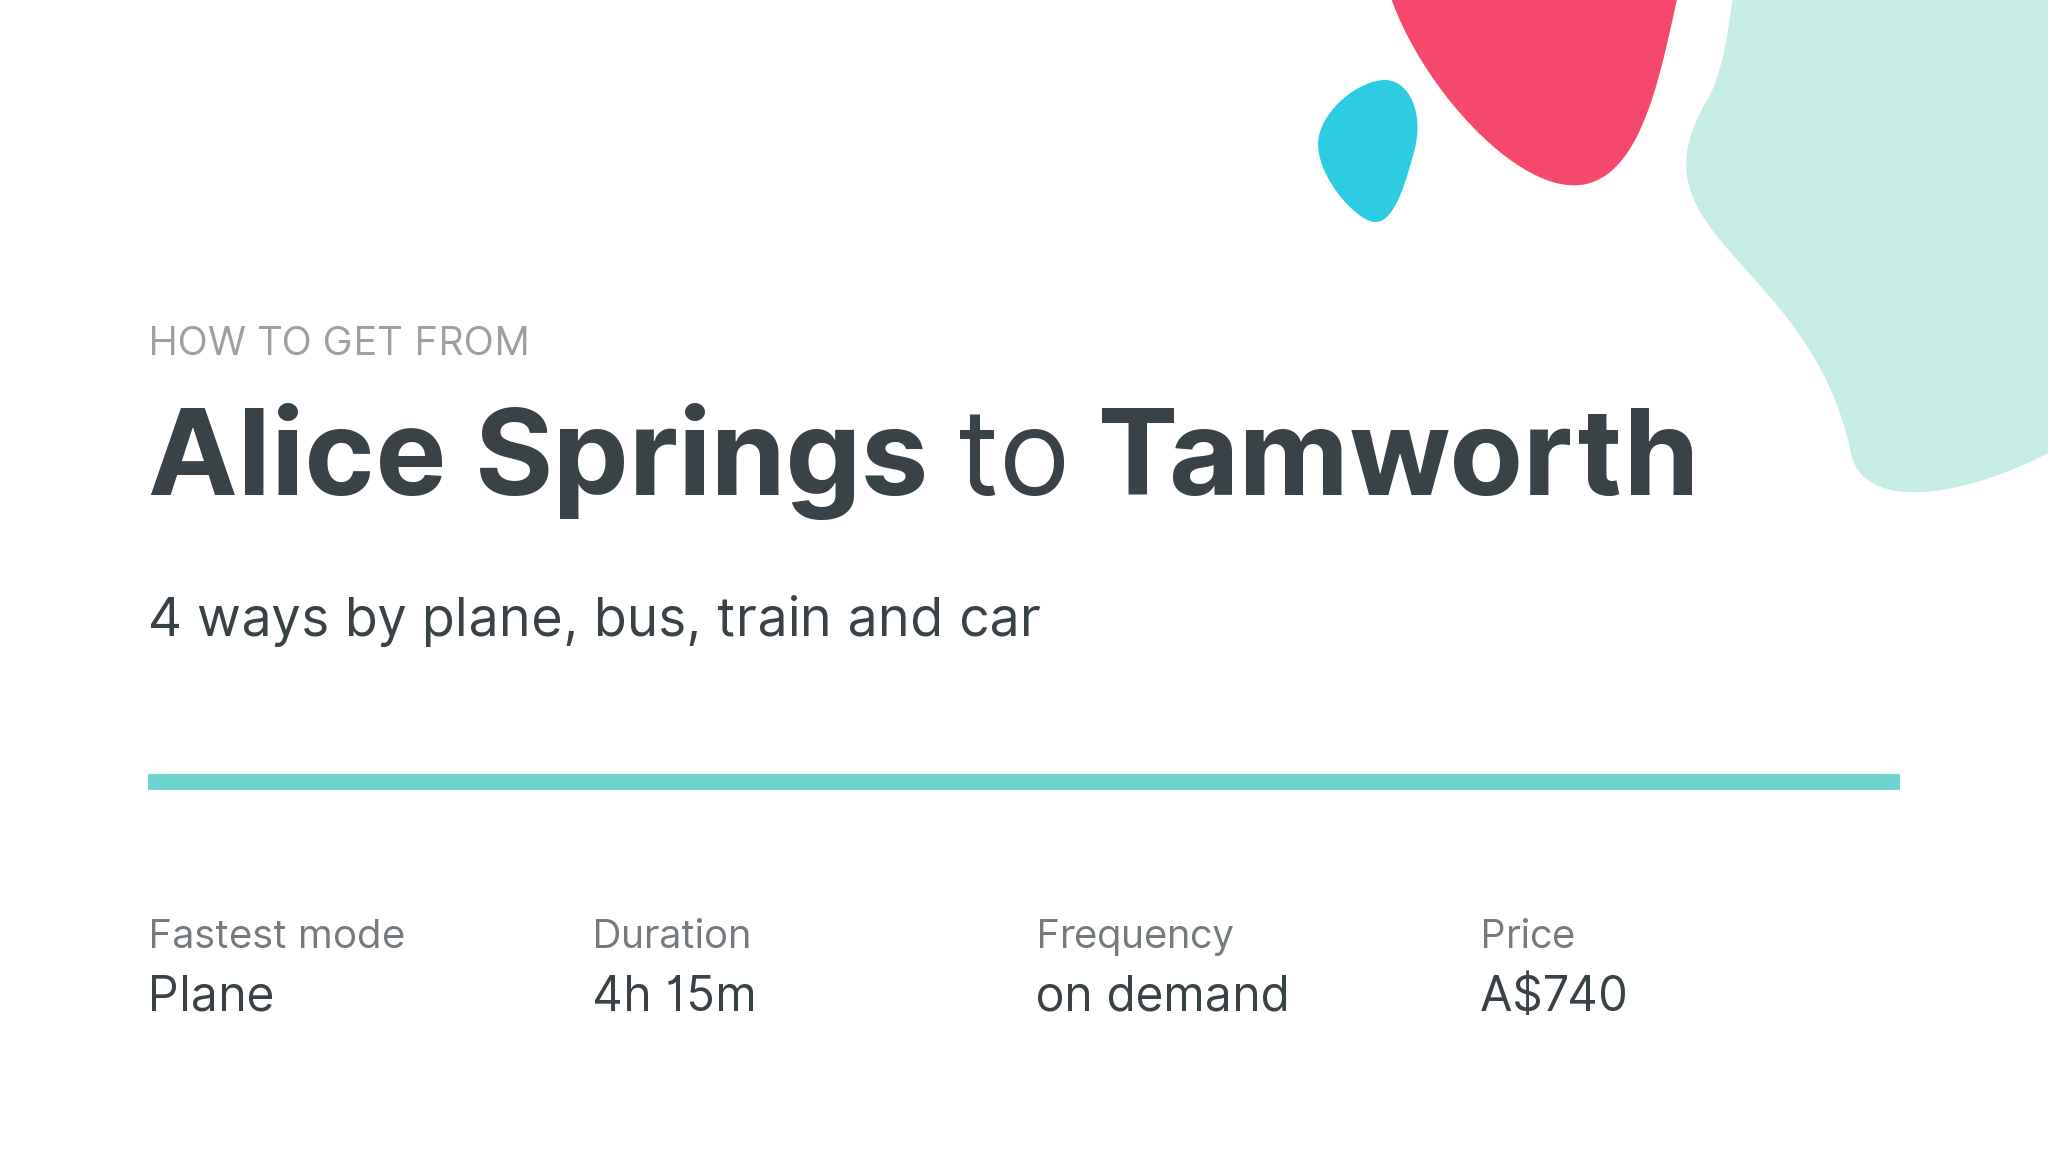 How do I get from Alice Springs to Tamworth